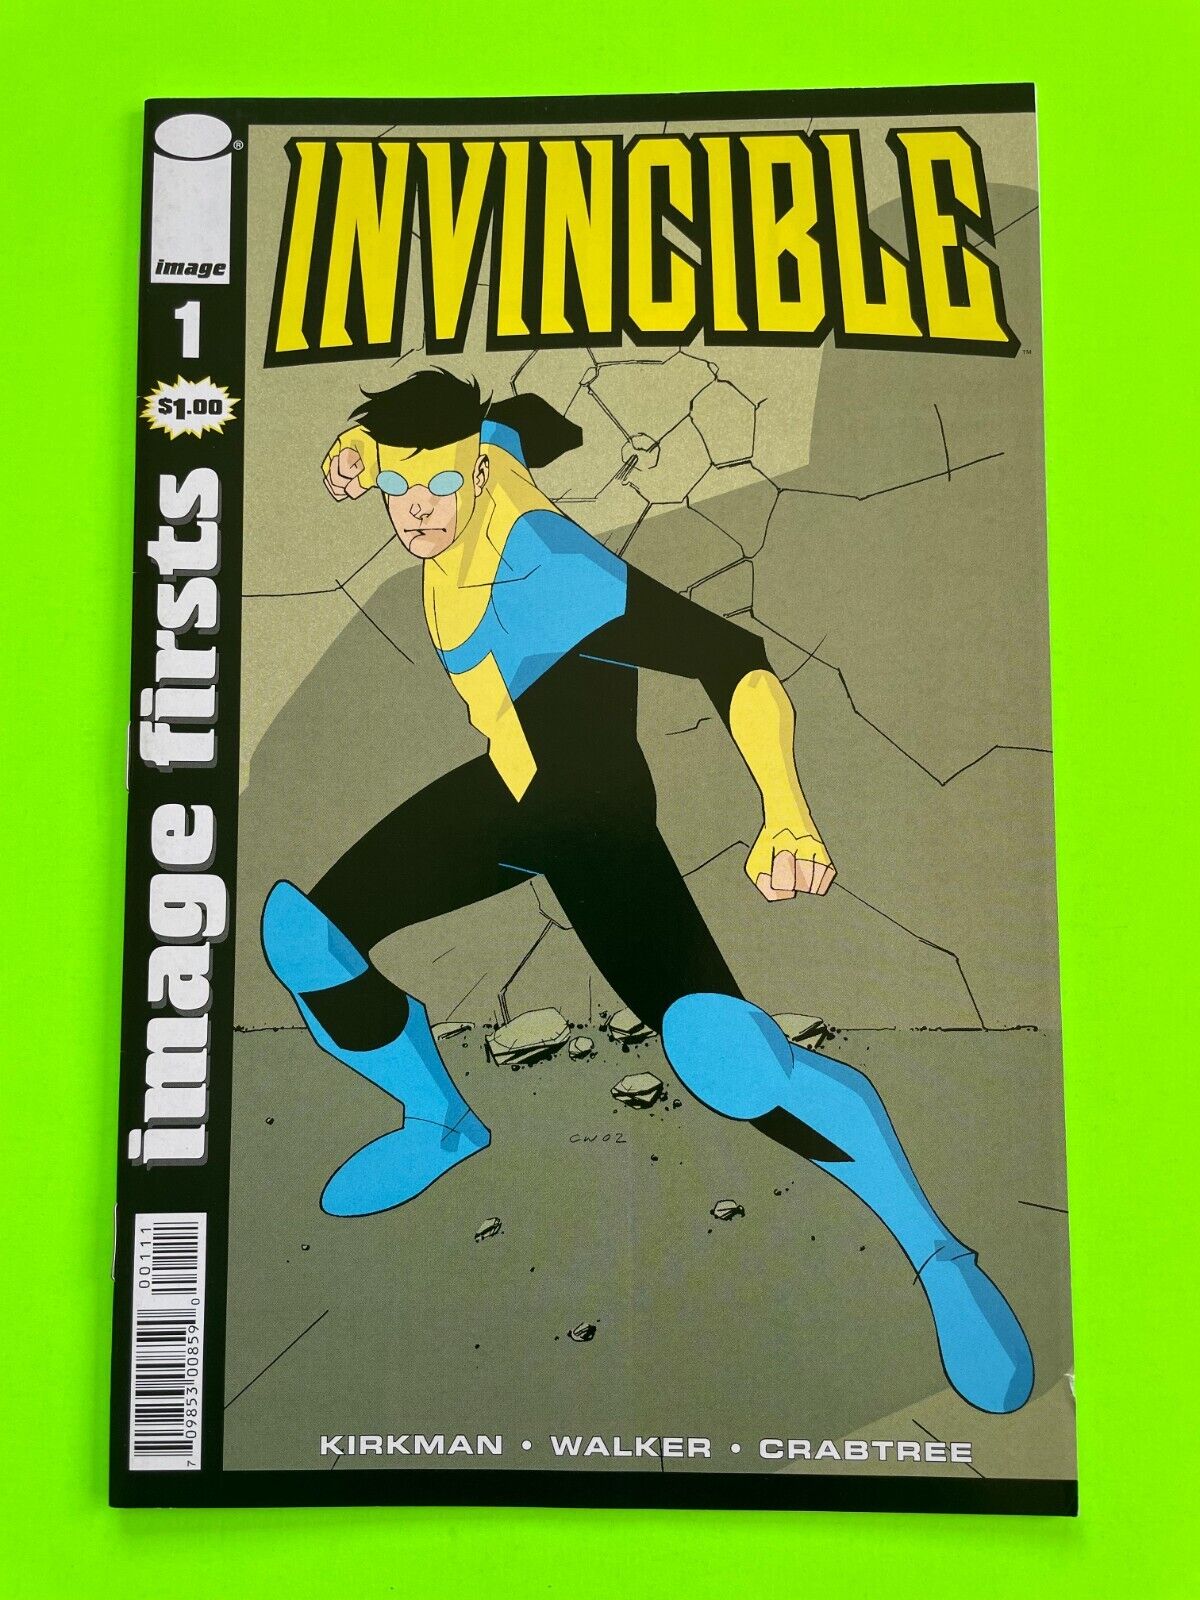 Invincible #1 (Image Firsts 2010 edition) Robert Kirkman  FN/VF 7.0